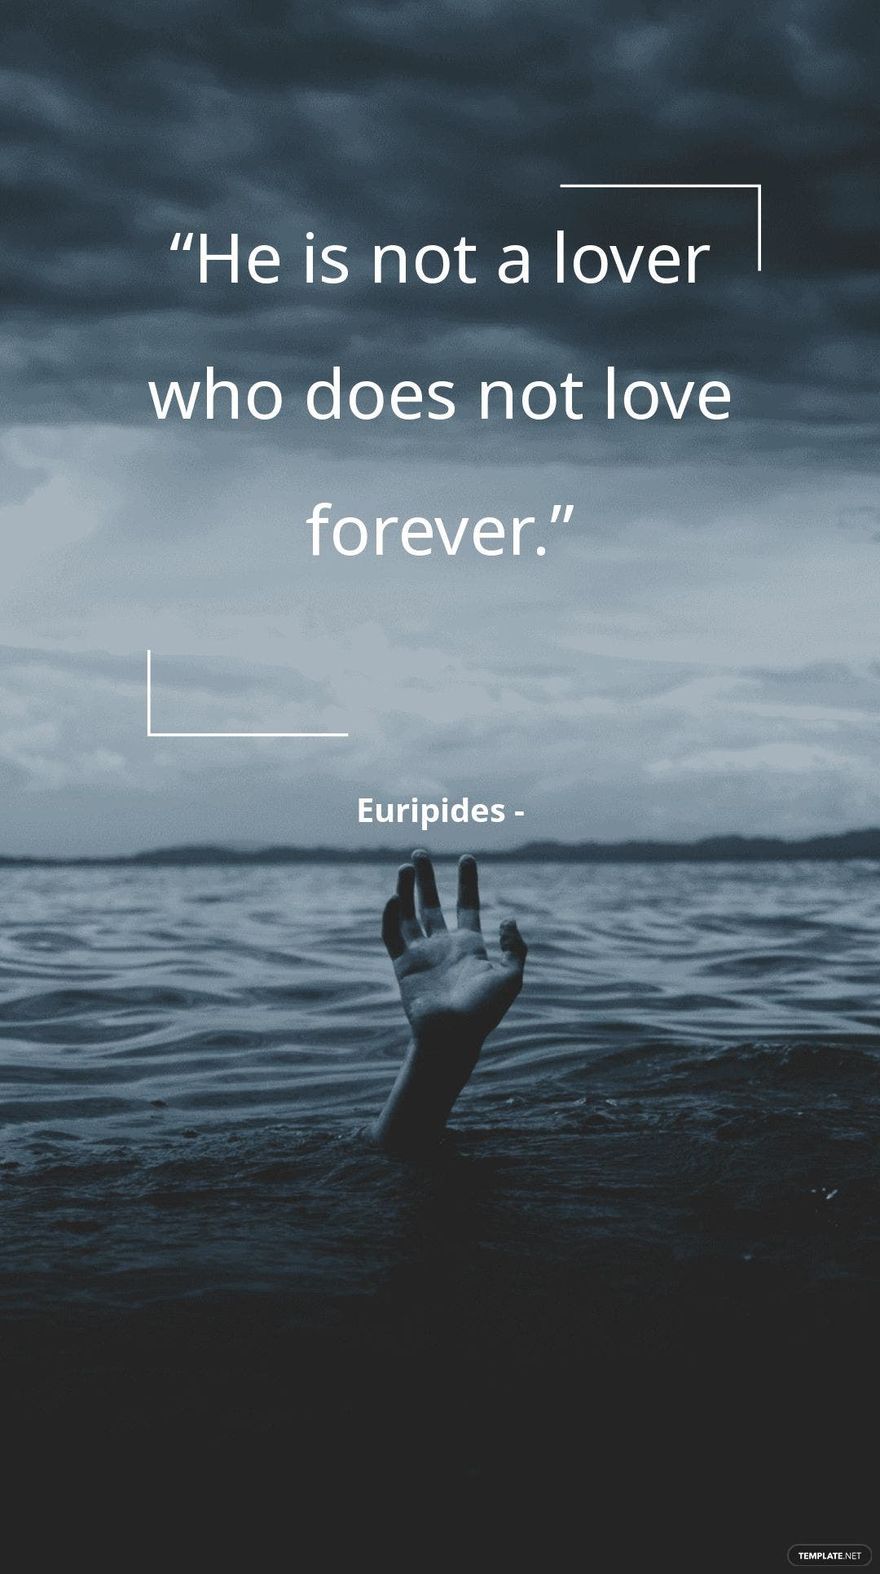 Euripides - “He is not a lover who does not love forever.”